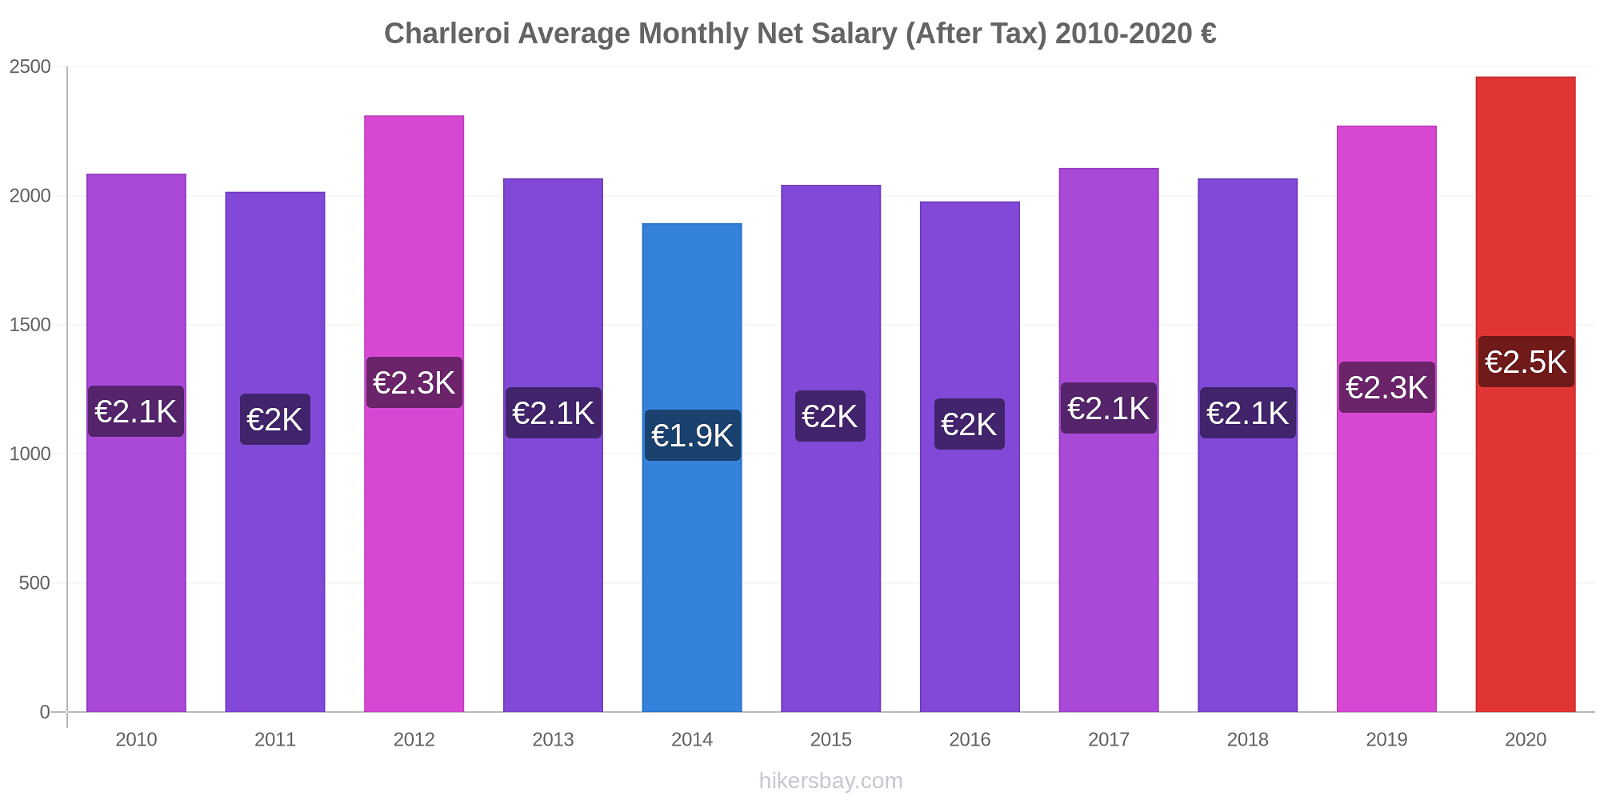 Charleroi price changes Average Monthly Net Salary (After Tax) hikersbay.com